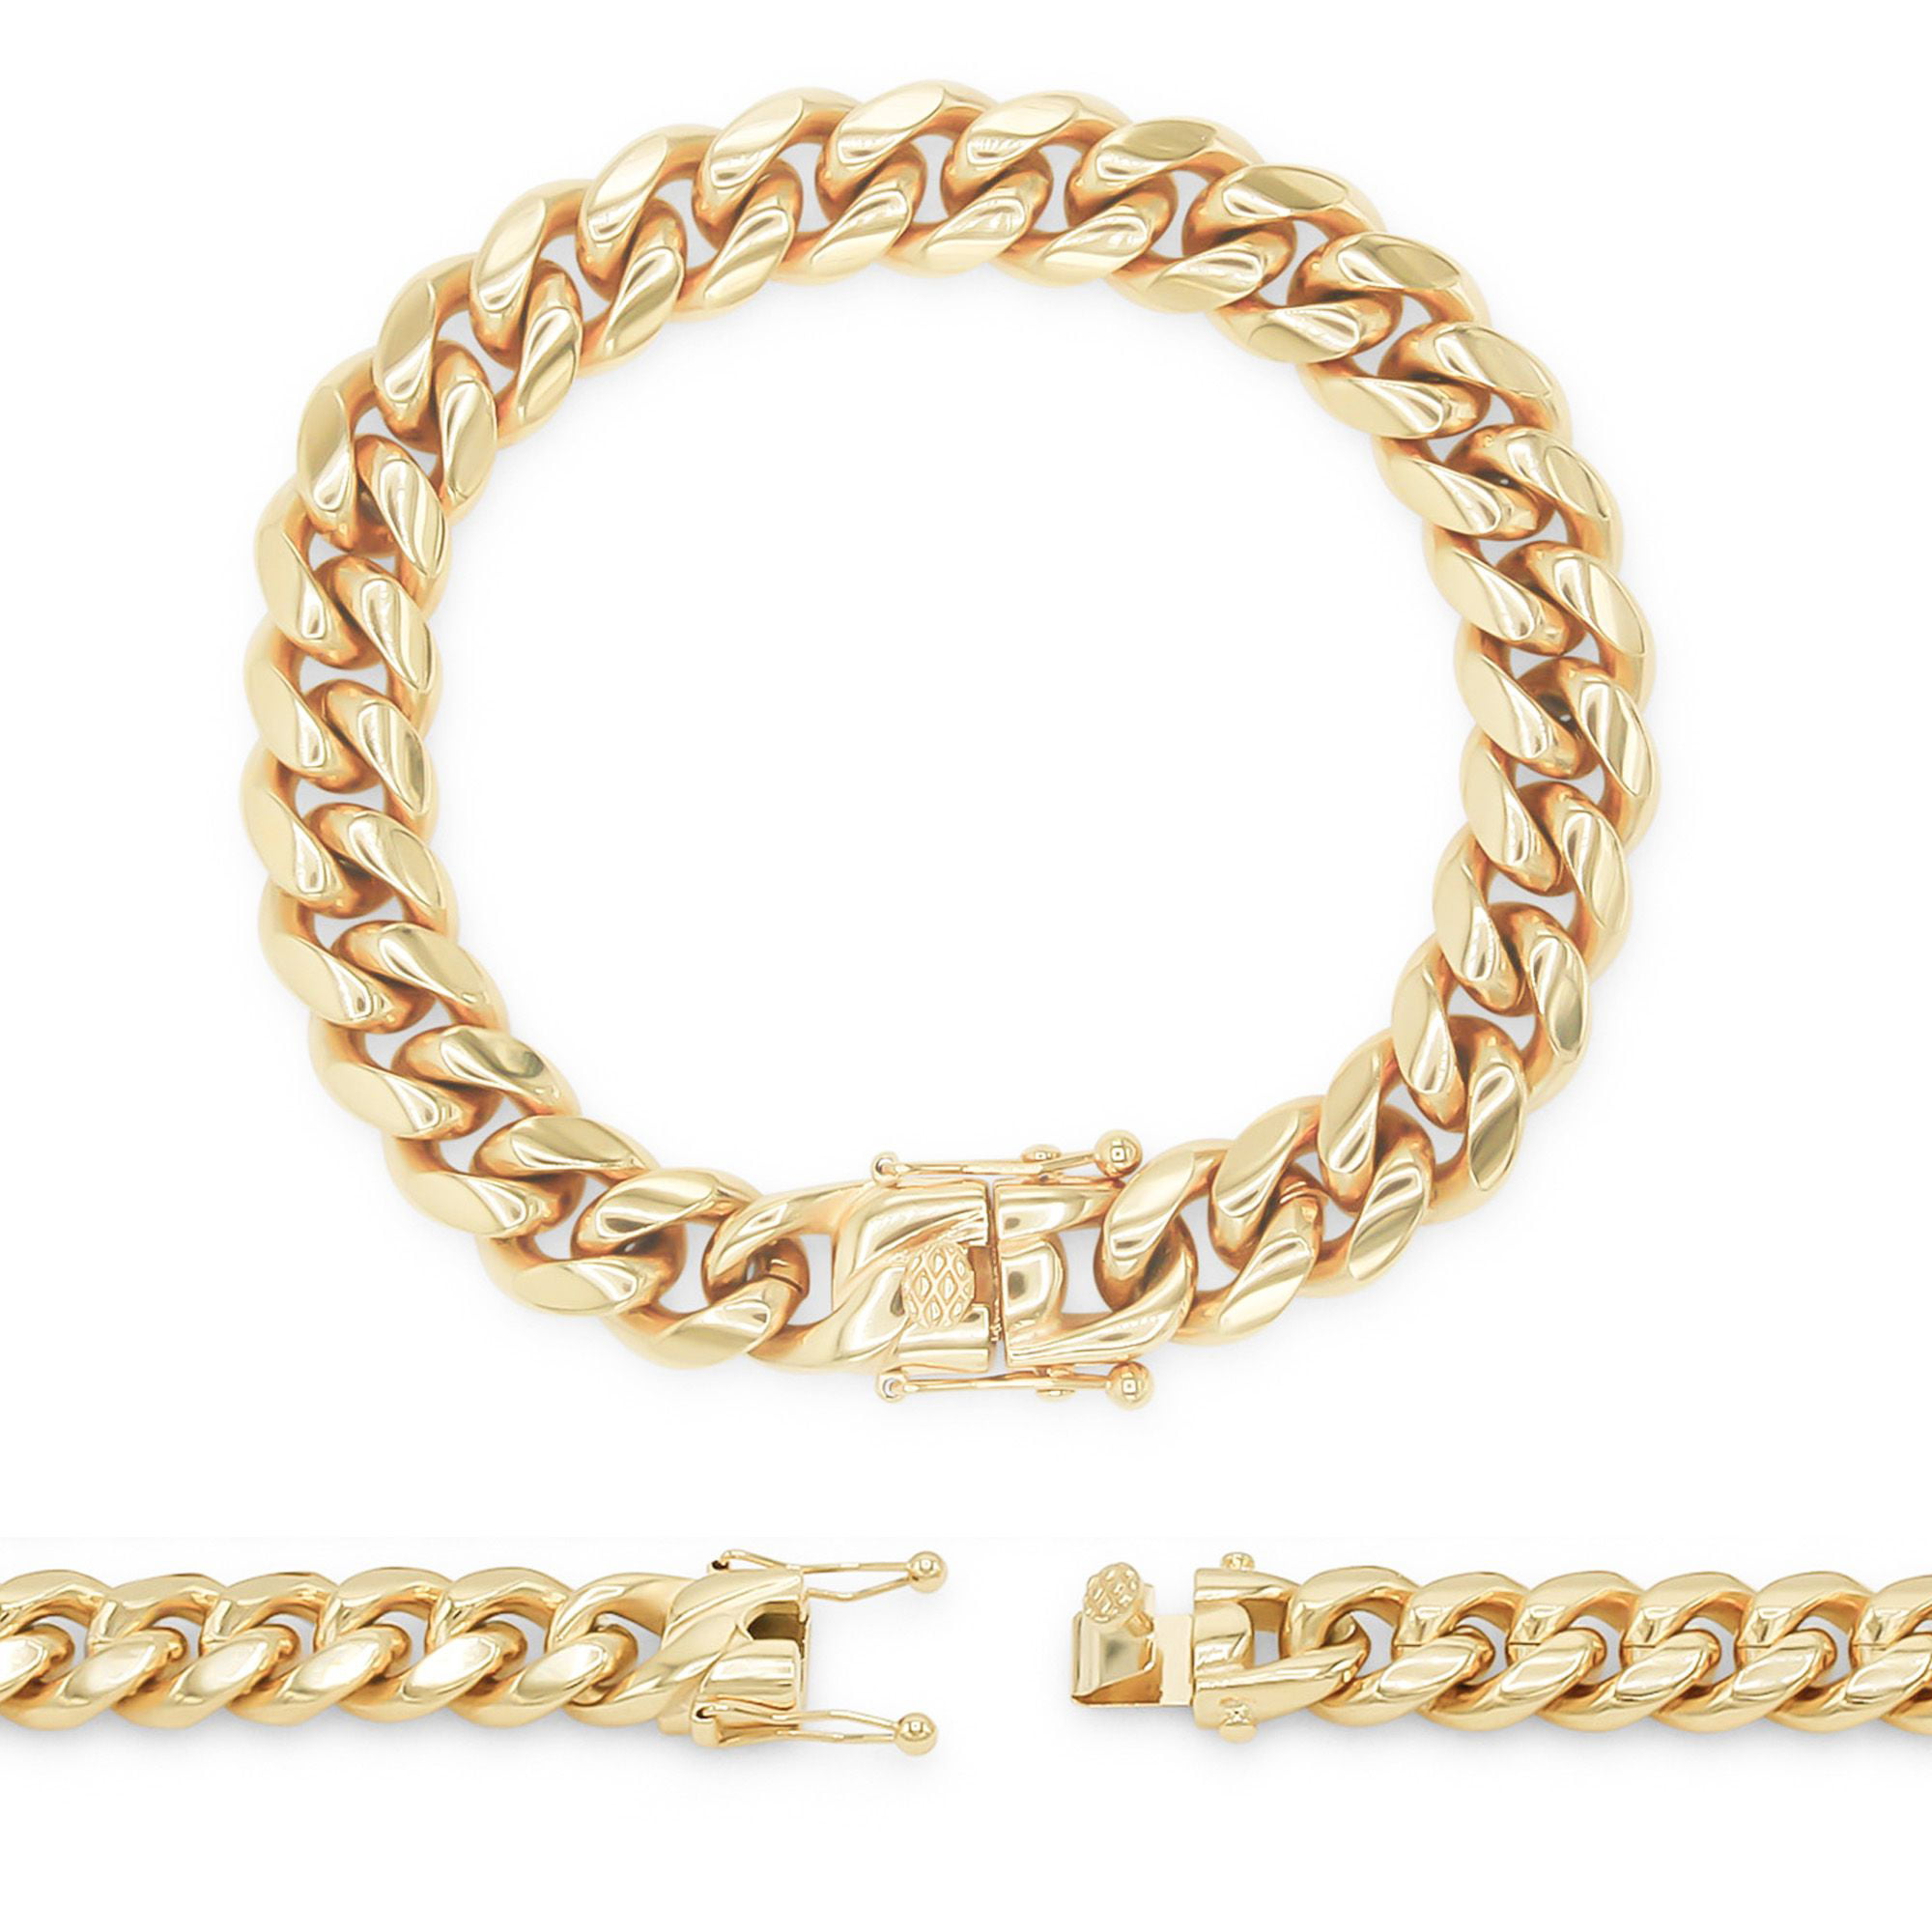 Men's Miami Cuban Link Bracelet HEAVY 14K Gold Plated Solid Stainless Steel 12mm 